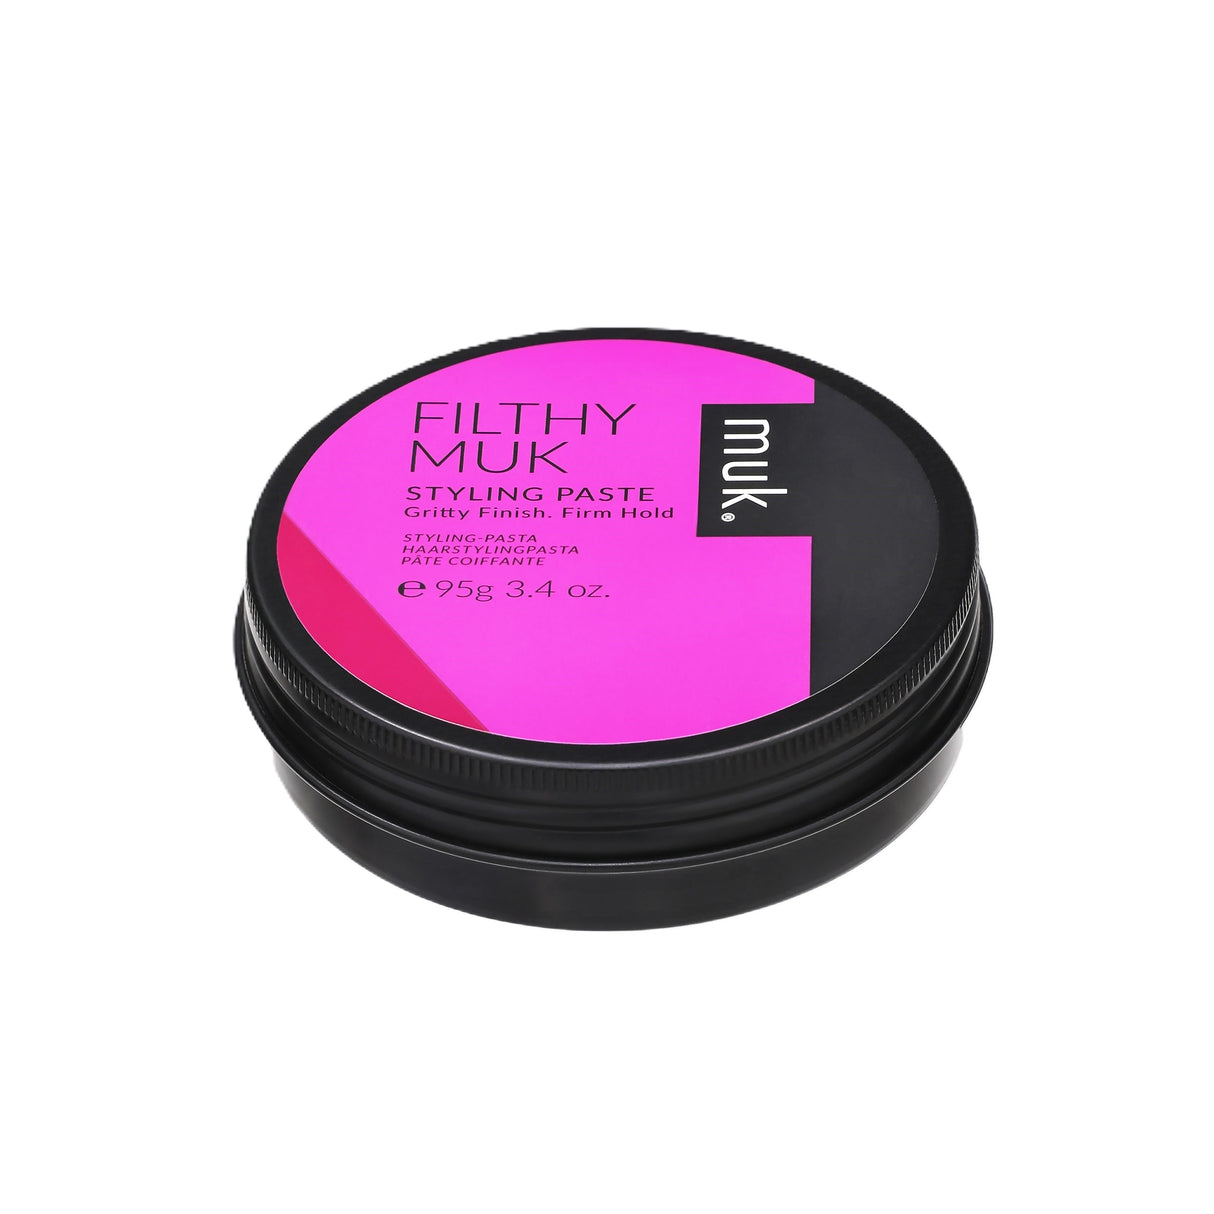 Filthy muk Styling Paste